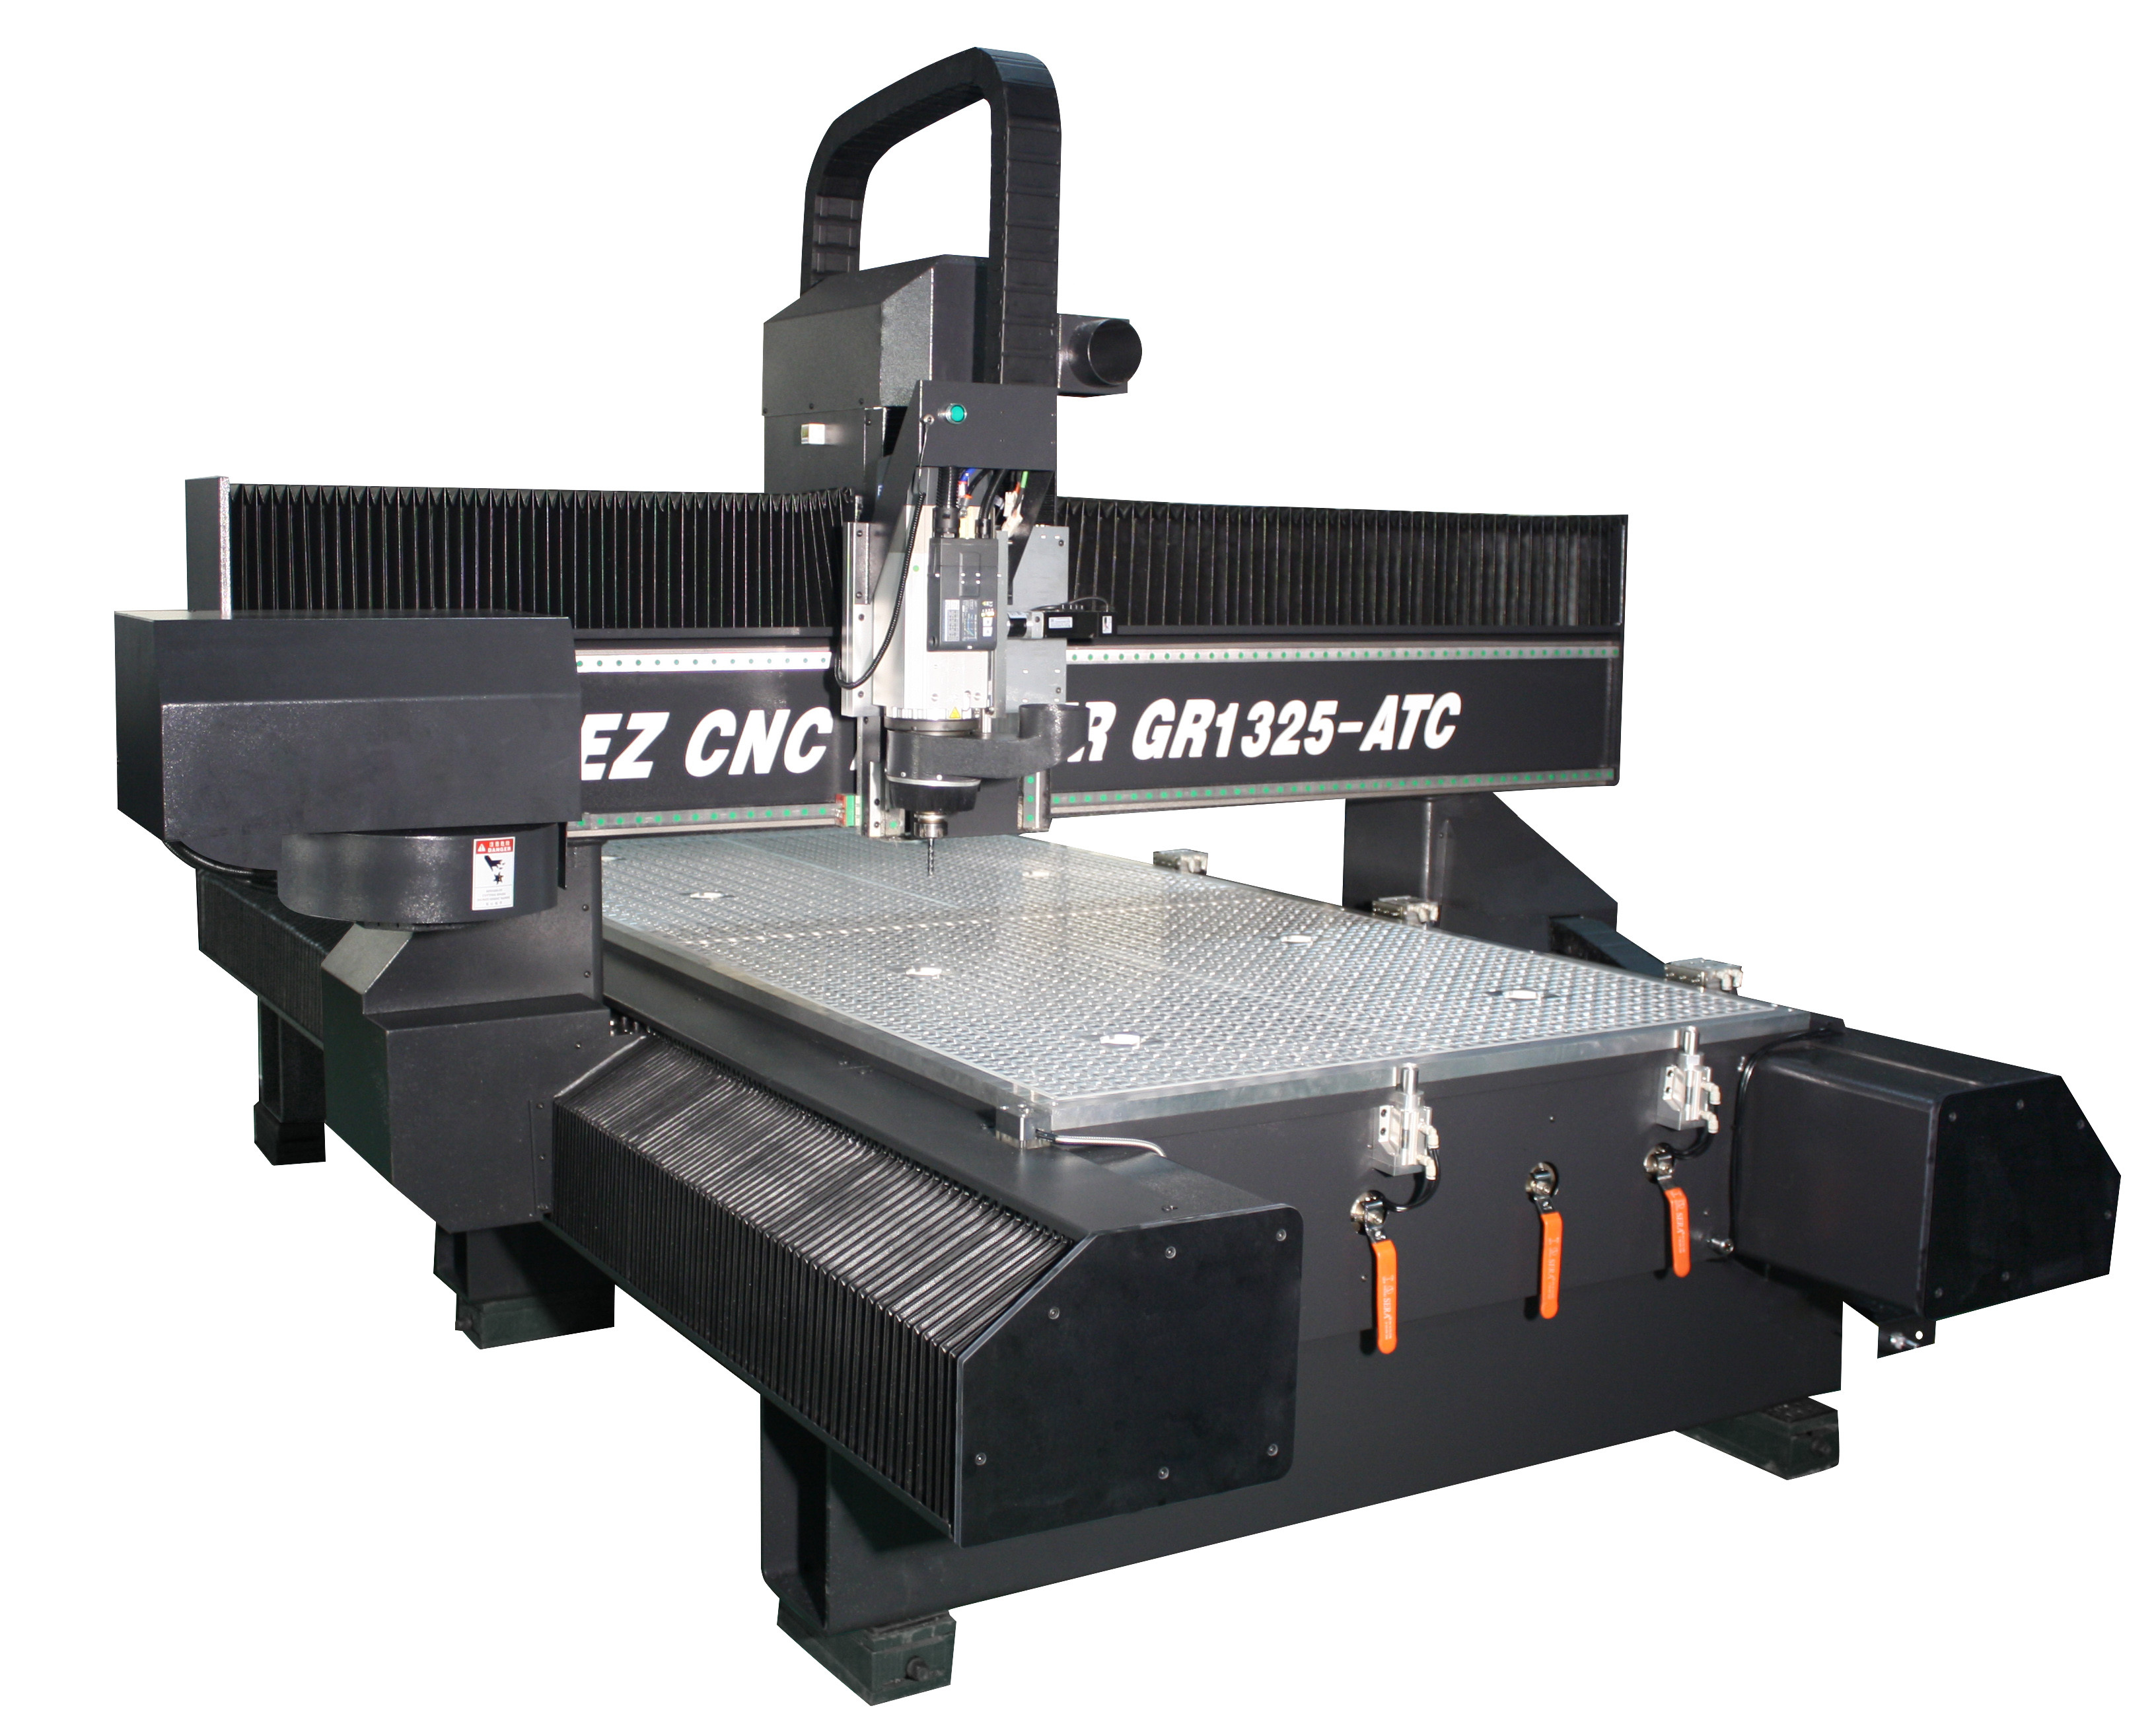  EZCNC Routers-GR 1325s/Wood, Acrylic, Alu. 3D Surface; SolidSurface cutting, engraving and marking system Manufactures